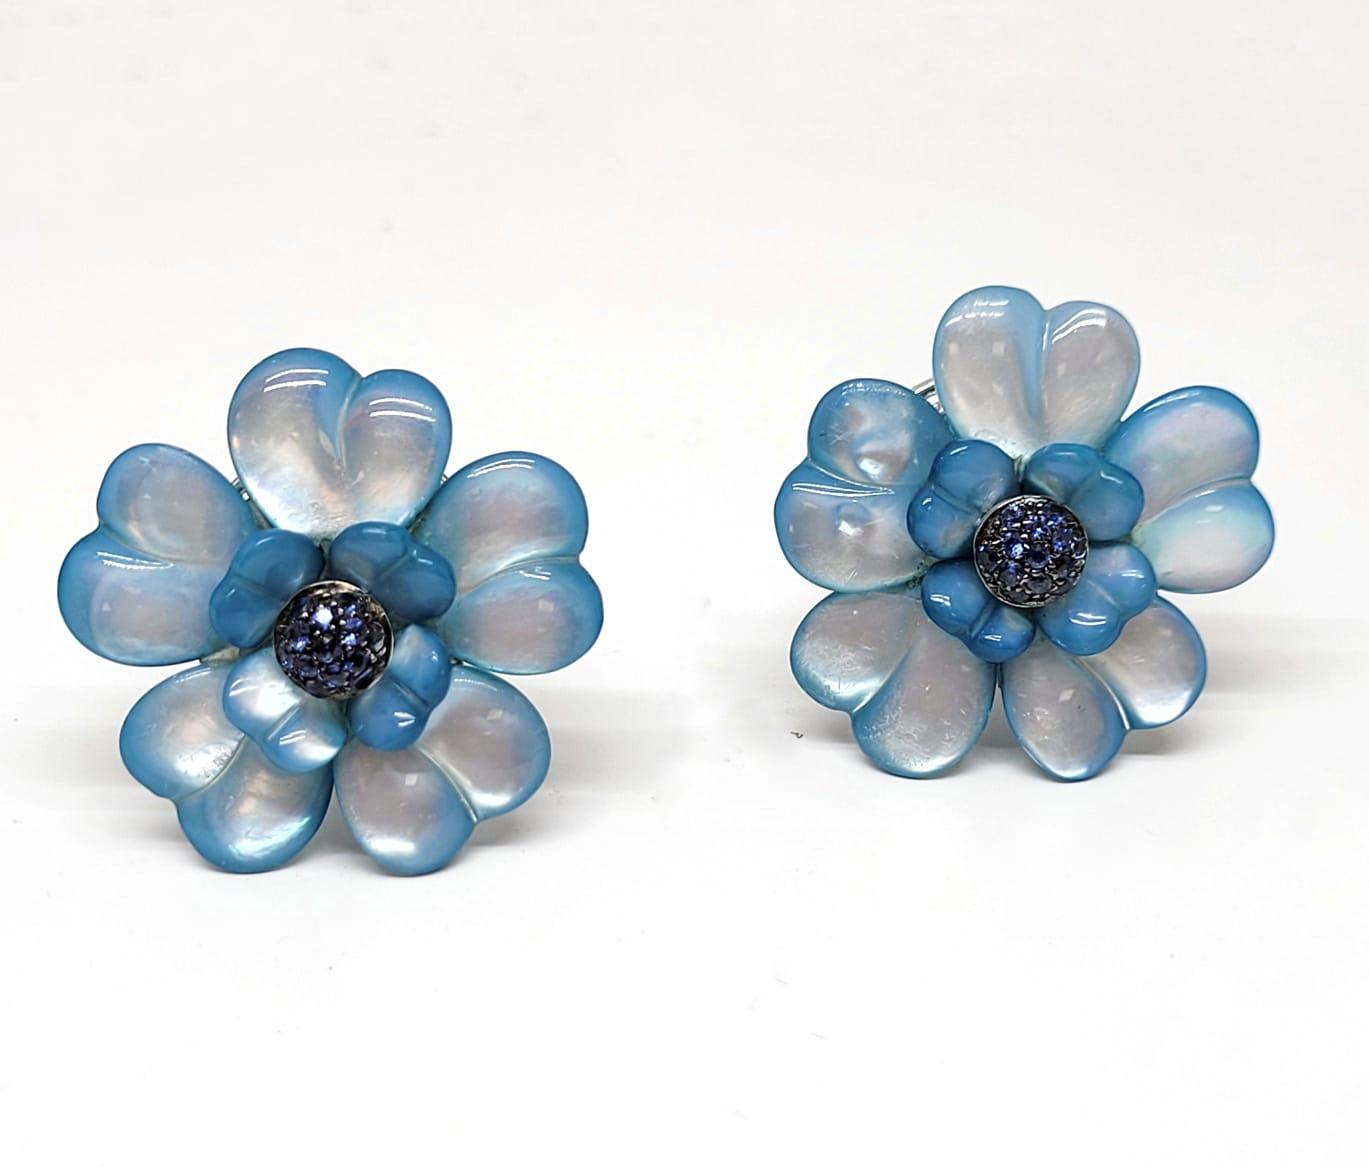 Andreoli Blue Sapphire Blue Dyed Mother of Pearl 18 Karat Gold Flower Earrings Clip-On

These earrings feature:
- 0.59 Carat Blue Sapphire
- Blue Dyed Mother of Pearl
- 19.60 Gram 18K White Gold
- Made In Italy